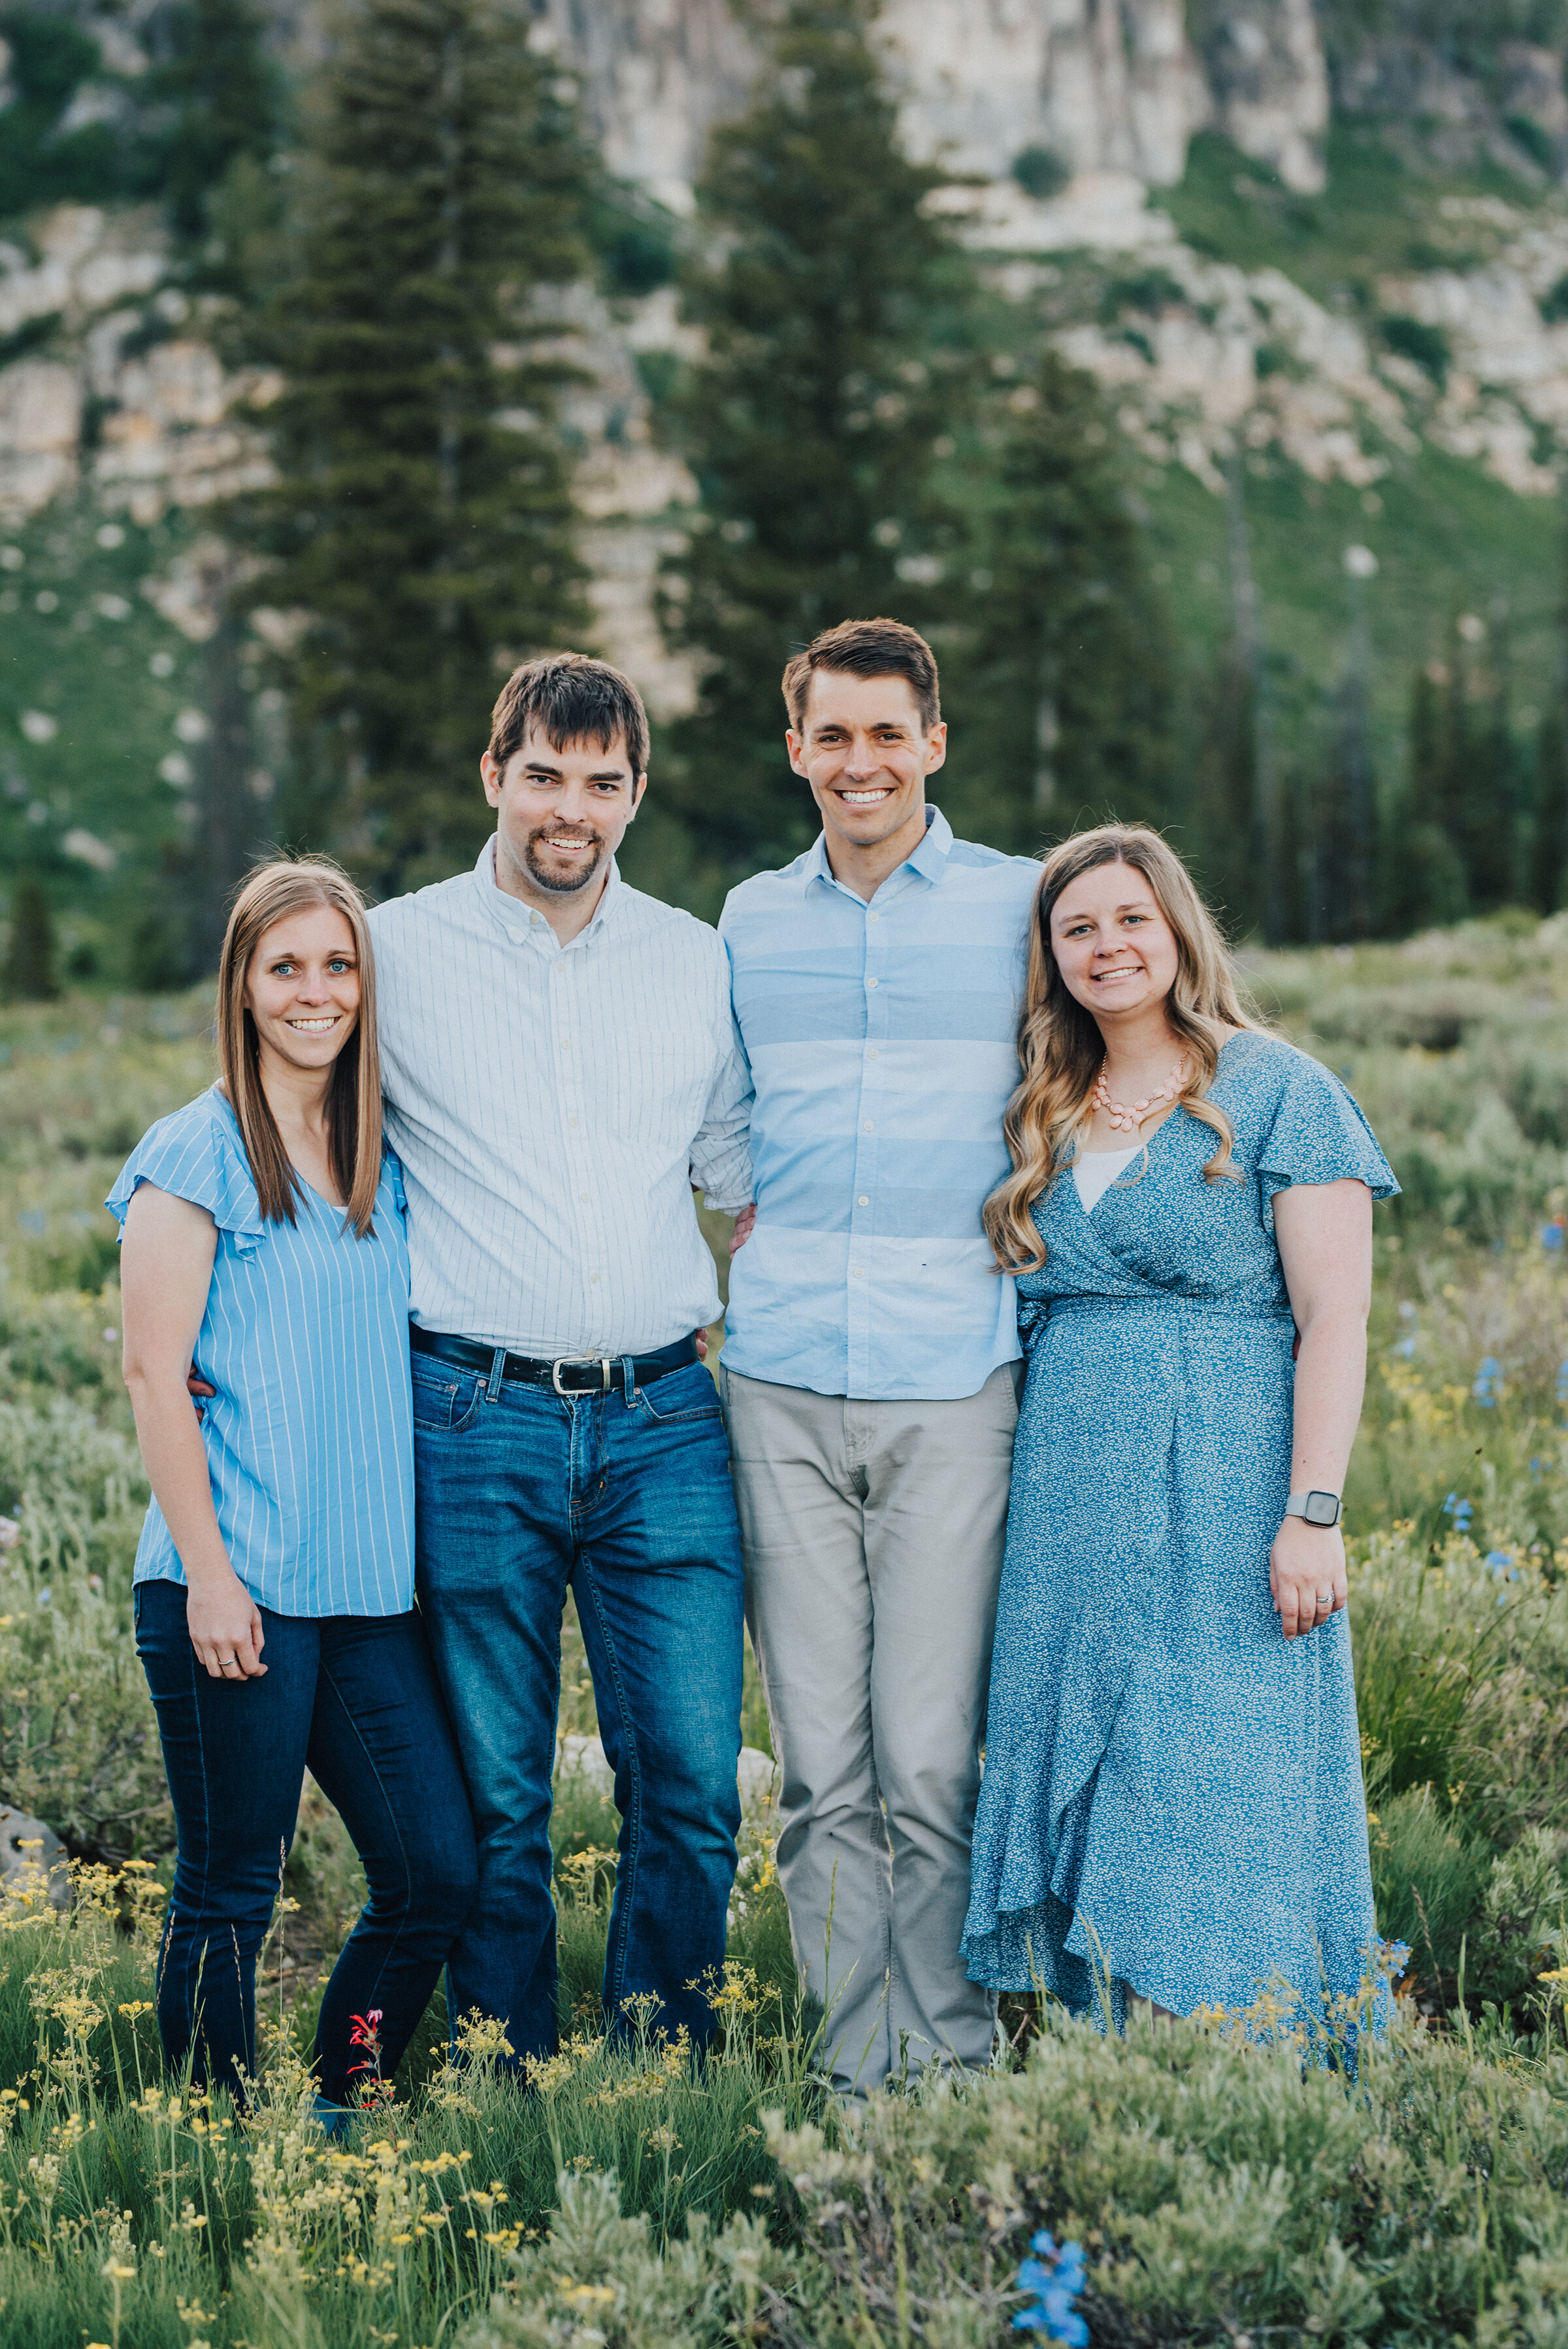  Loving siblings during this family photoshoot up Logan canyon at Tony Grove. Logan Utah family photographer Kristi Alyse photography Tony Grove forest nature photos Logan canyon light blue family photos wild flowers grand parents children parents spouses reunited dreamy scenic photo shoot #kristialysephotography #utahphotographer #familyphotography #logancanyon #familyphotos #forest #wildflowers #northernutah #familyportraits #family 